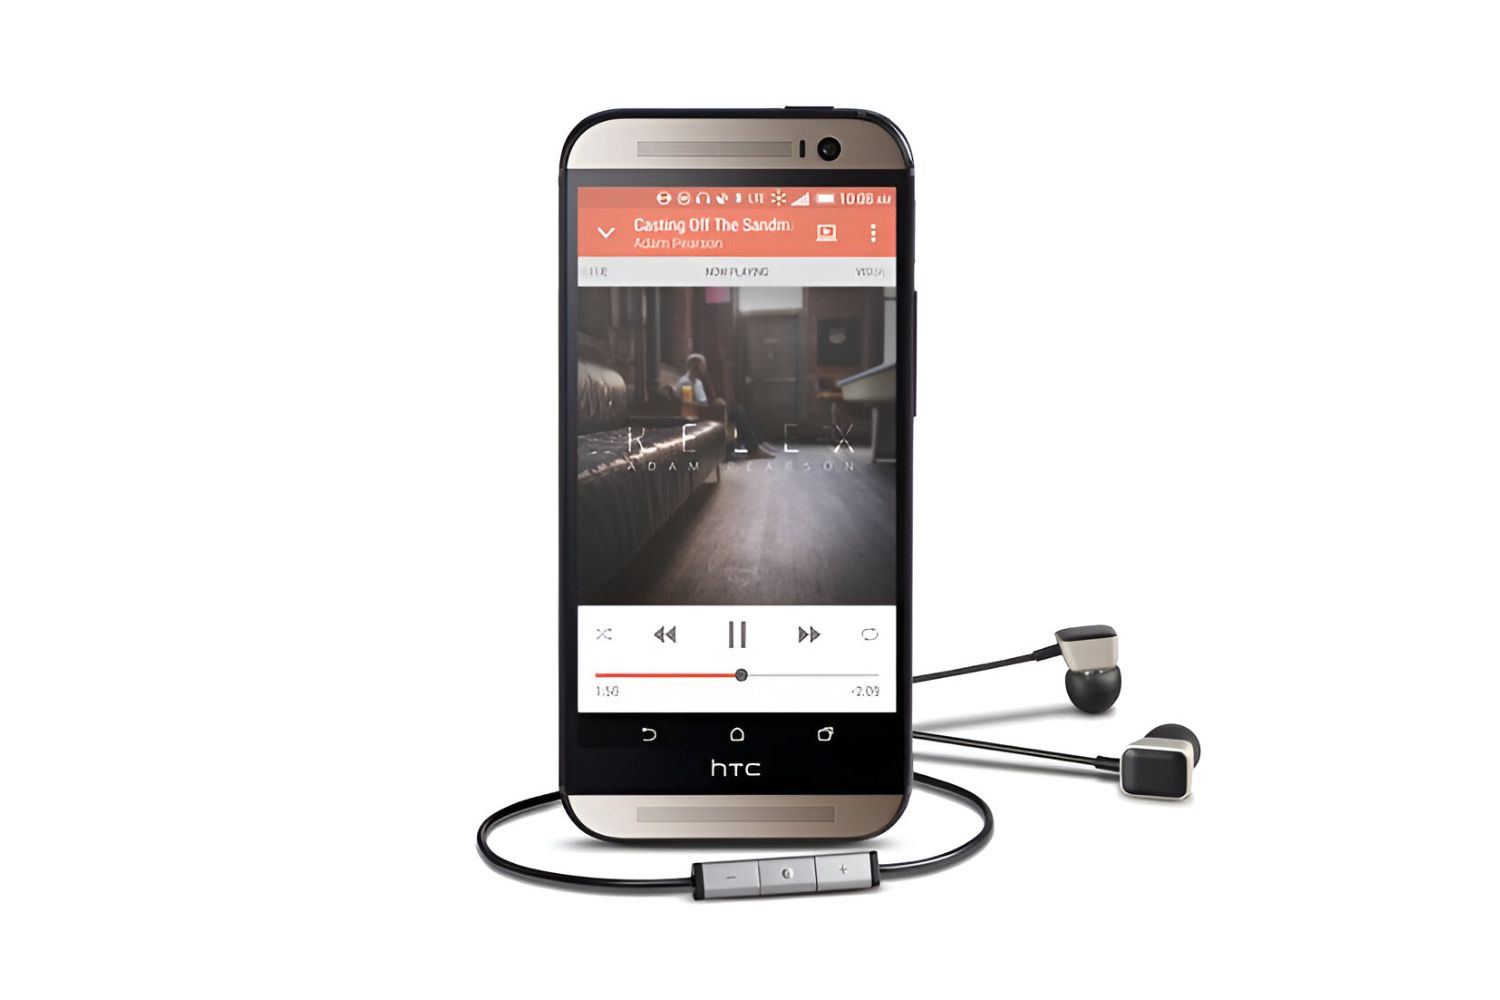 How To Download Music On Htc One M8